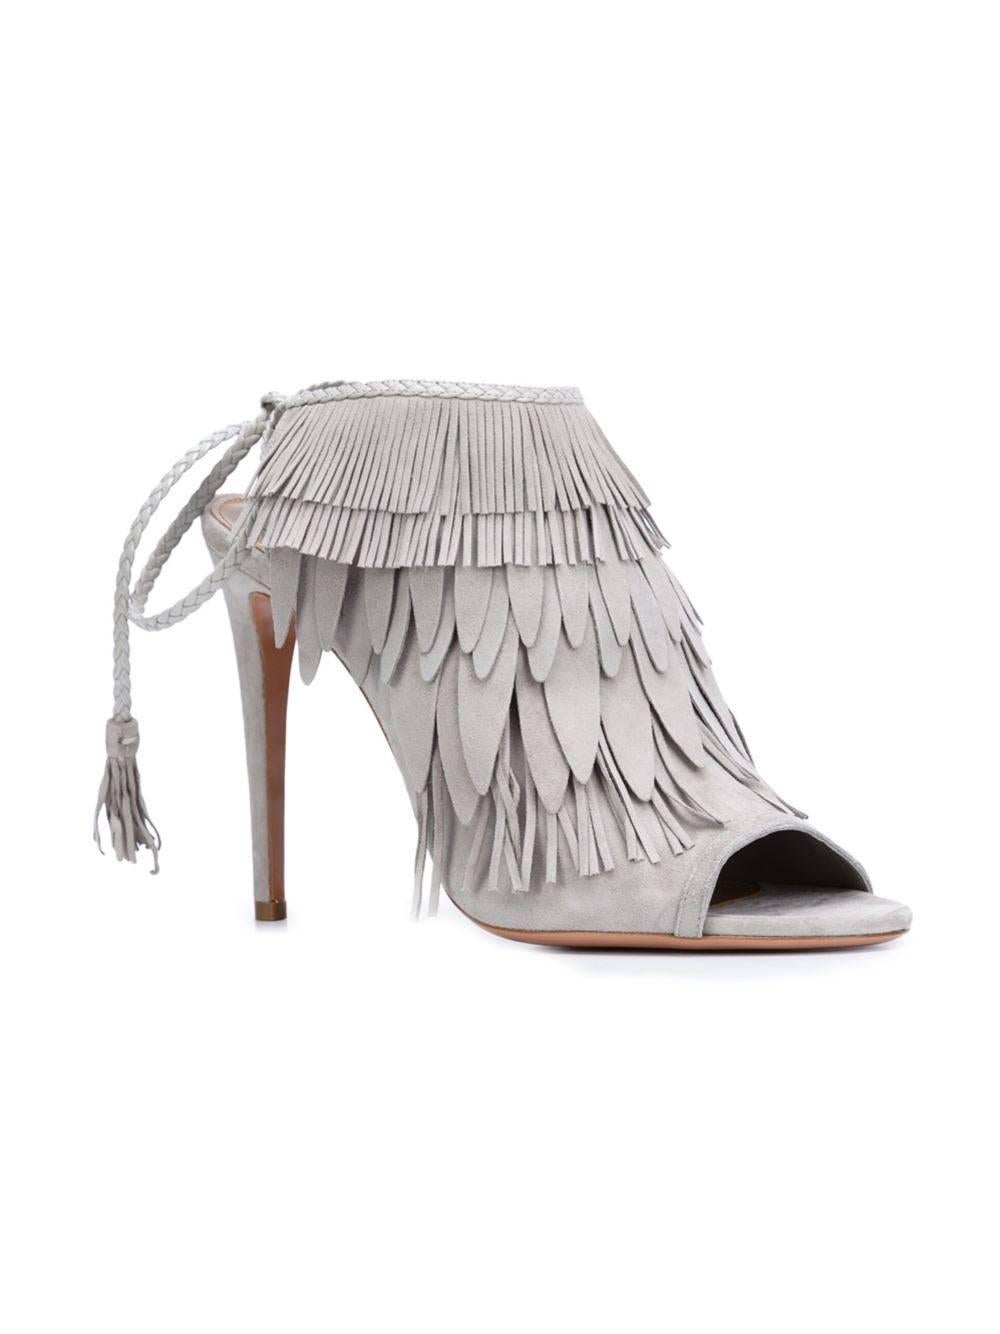 CURATOR'S NOTES   

Aquazzura NEW & SOLD OUT Gray Suede Tassel Evening Heels Sandals in Box  

Size IT 39
Suede  
Tie closures at ankles  
Made in Italy  
Heel heigh 4" 
Includes original Aquazzura dust bag and box   

Shop Newfound Luxury